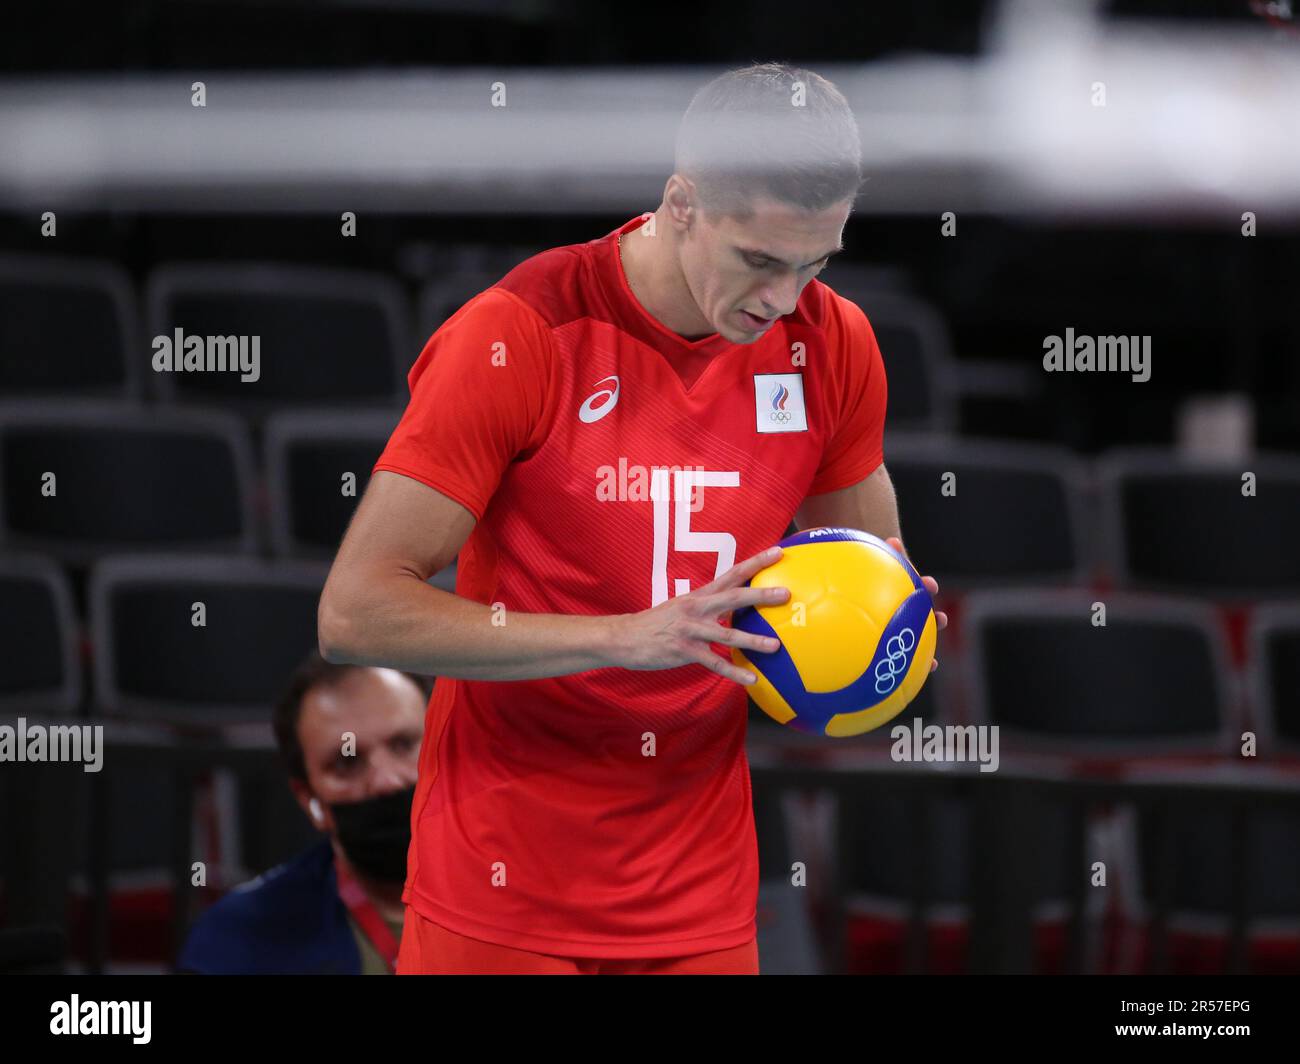 AUG 7, 2021 - Tokyo, Japan: Victor POLETAEV #15 of Team Russia in the Volleyball Men's Gold Medal Match between France and the Russian Olympic Committee at the Tokyo 2020 Olympic Games (Photo: Mickael Chavet/RX) Stock Photo